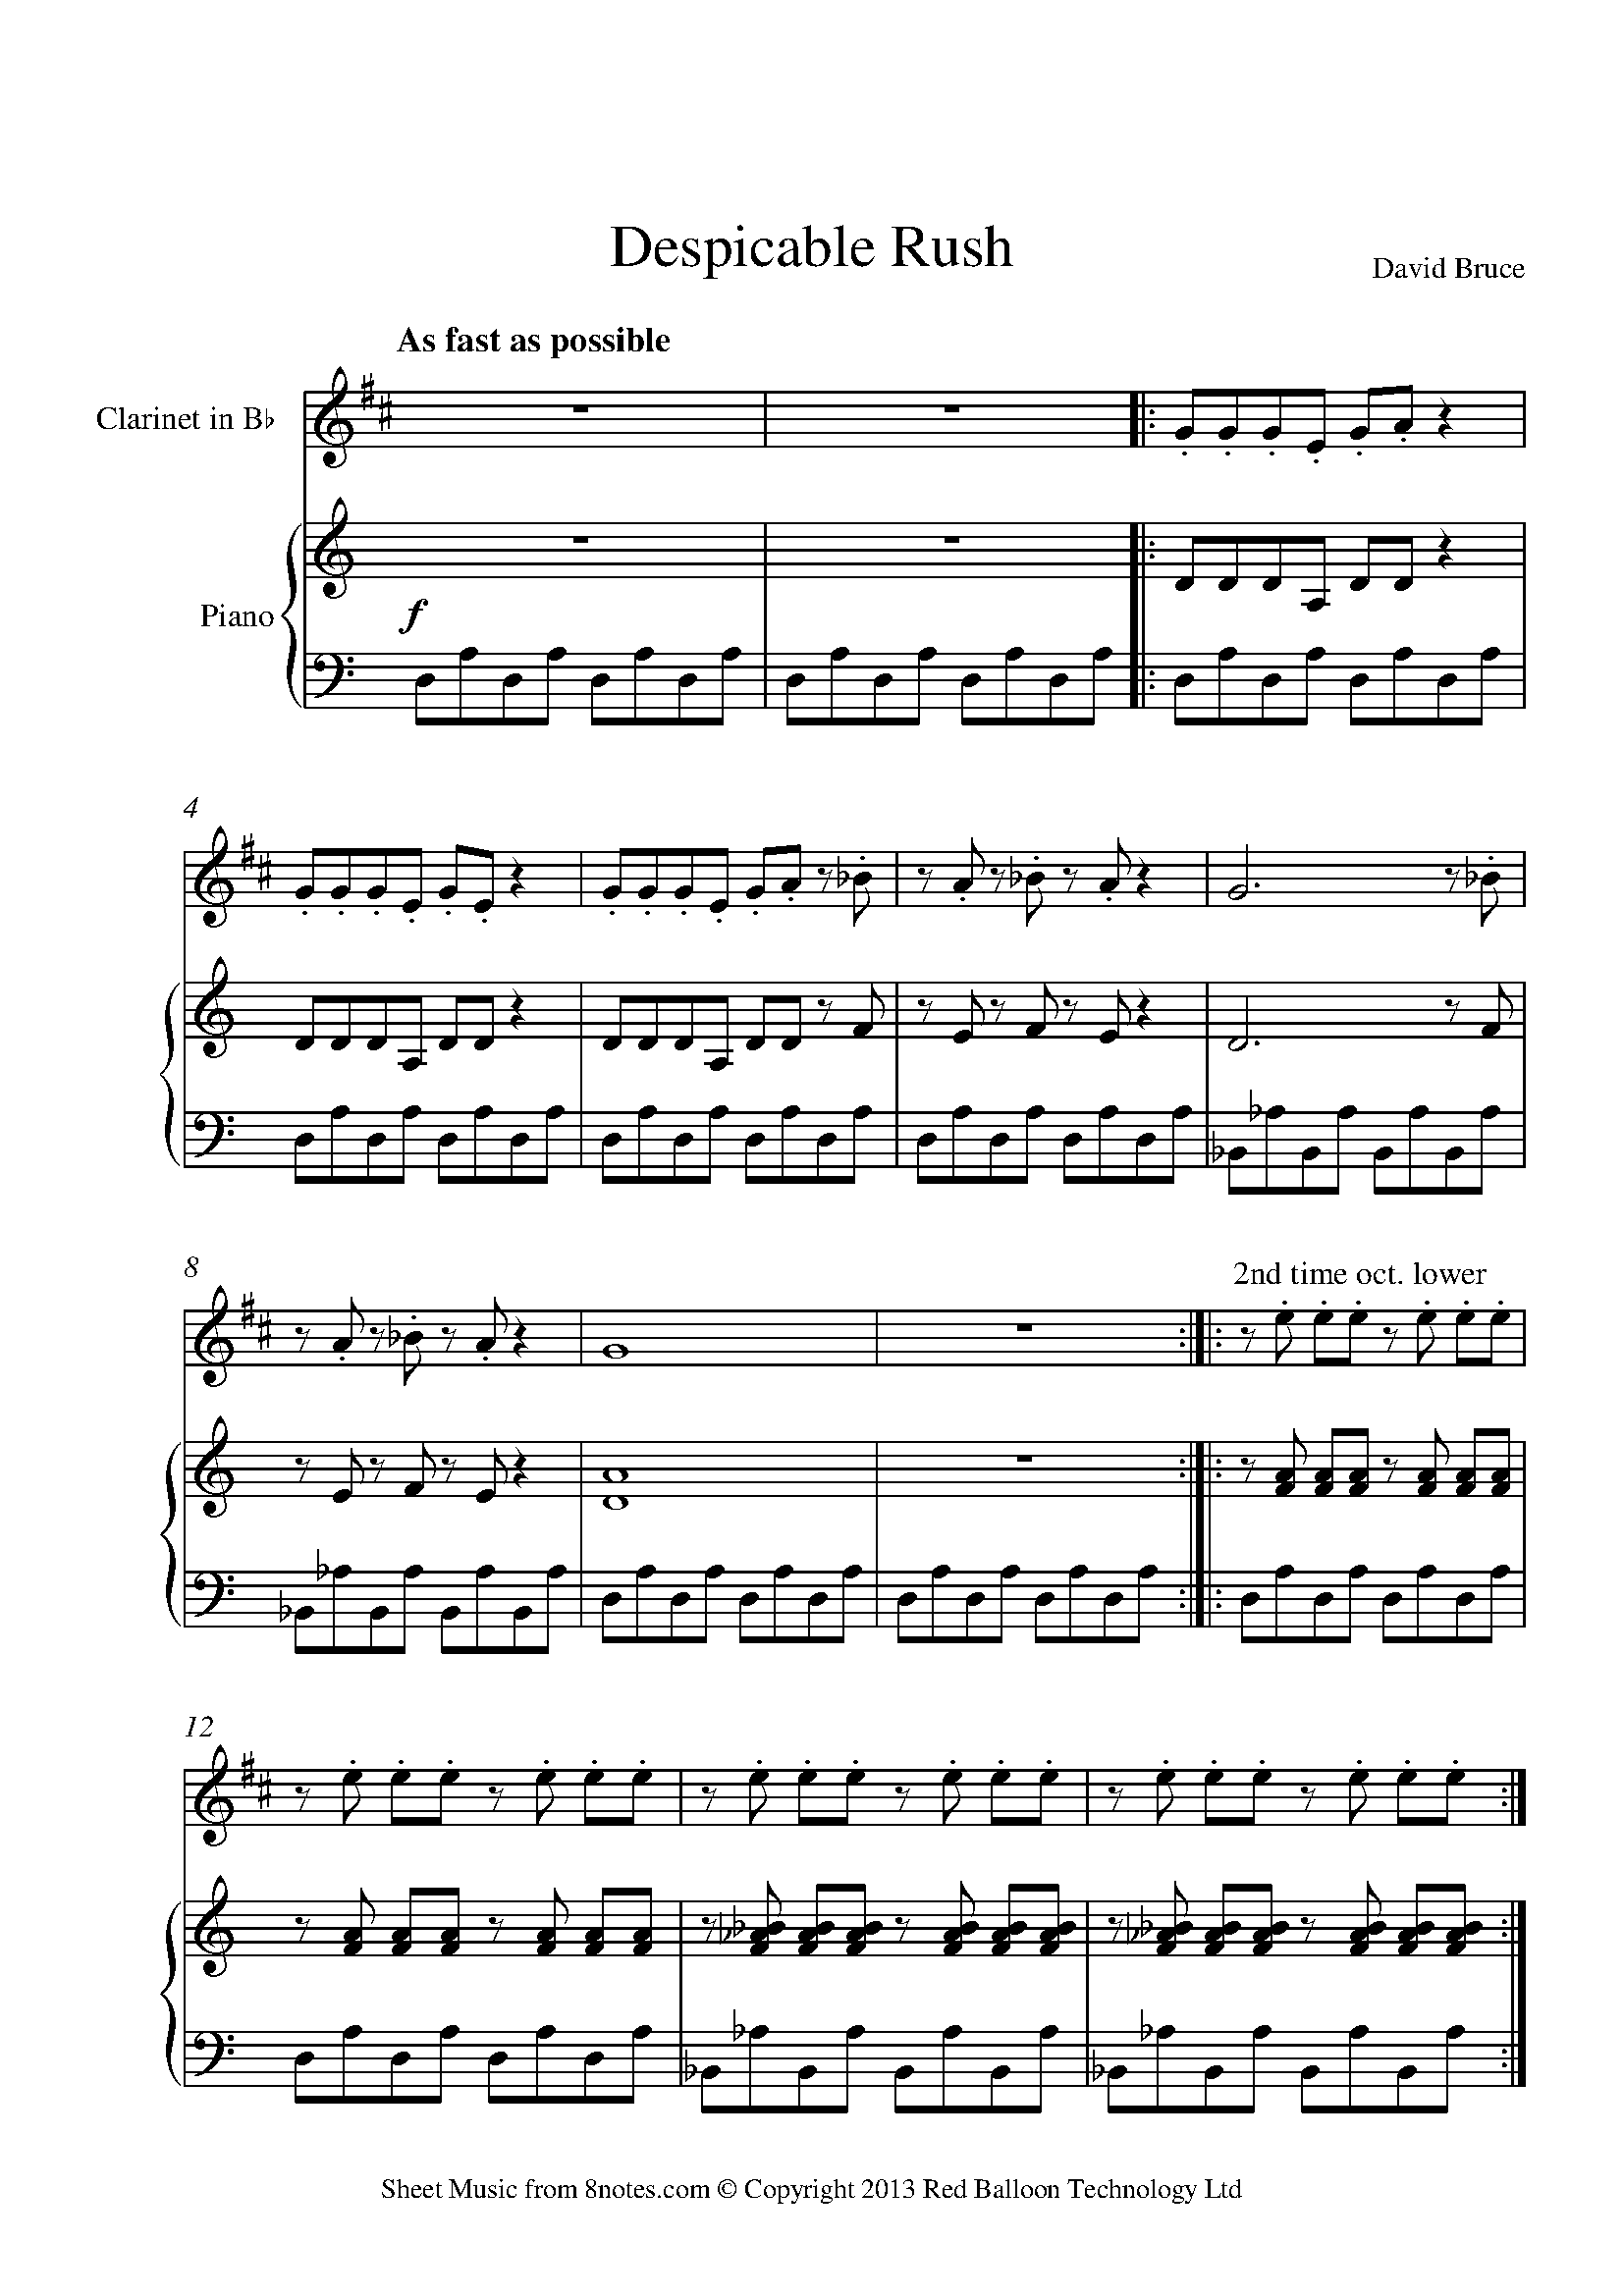 David Bruce - Despicable Rush Sheet music for Clarinet - 8notes.com